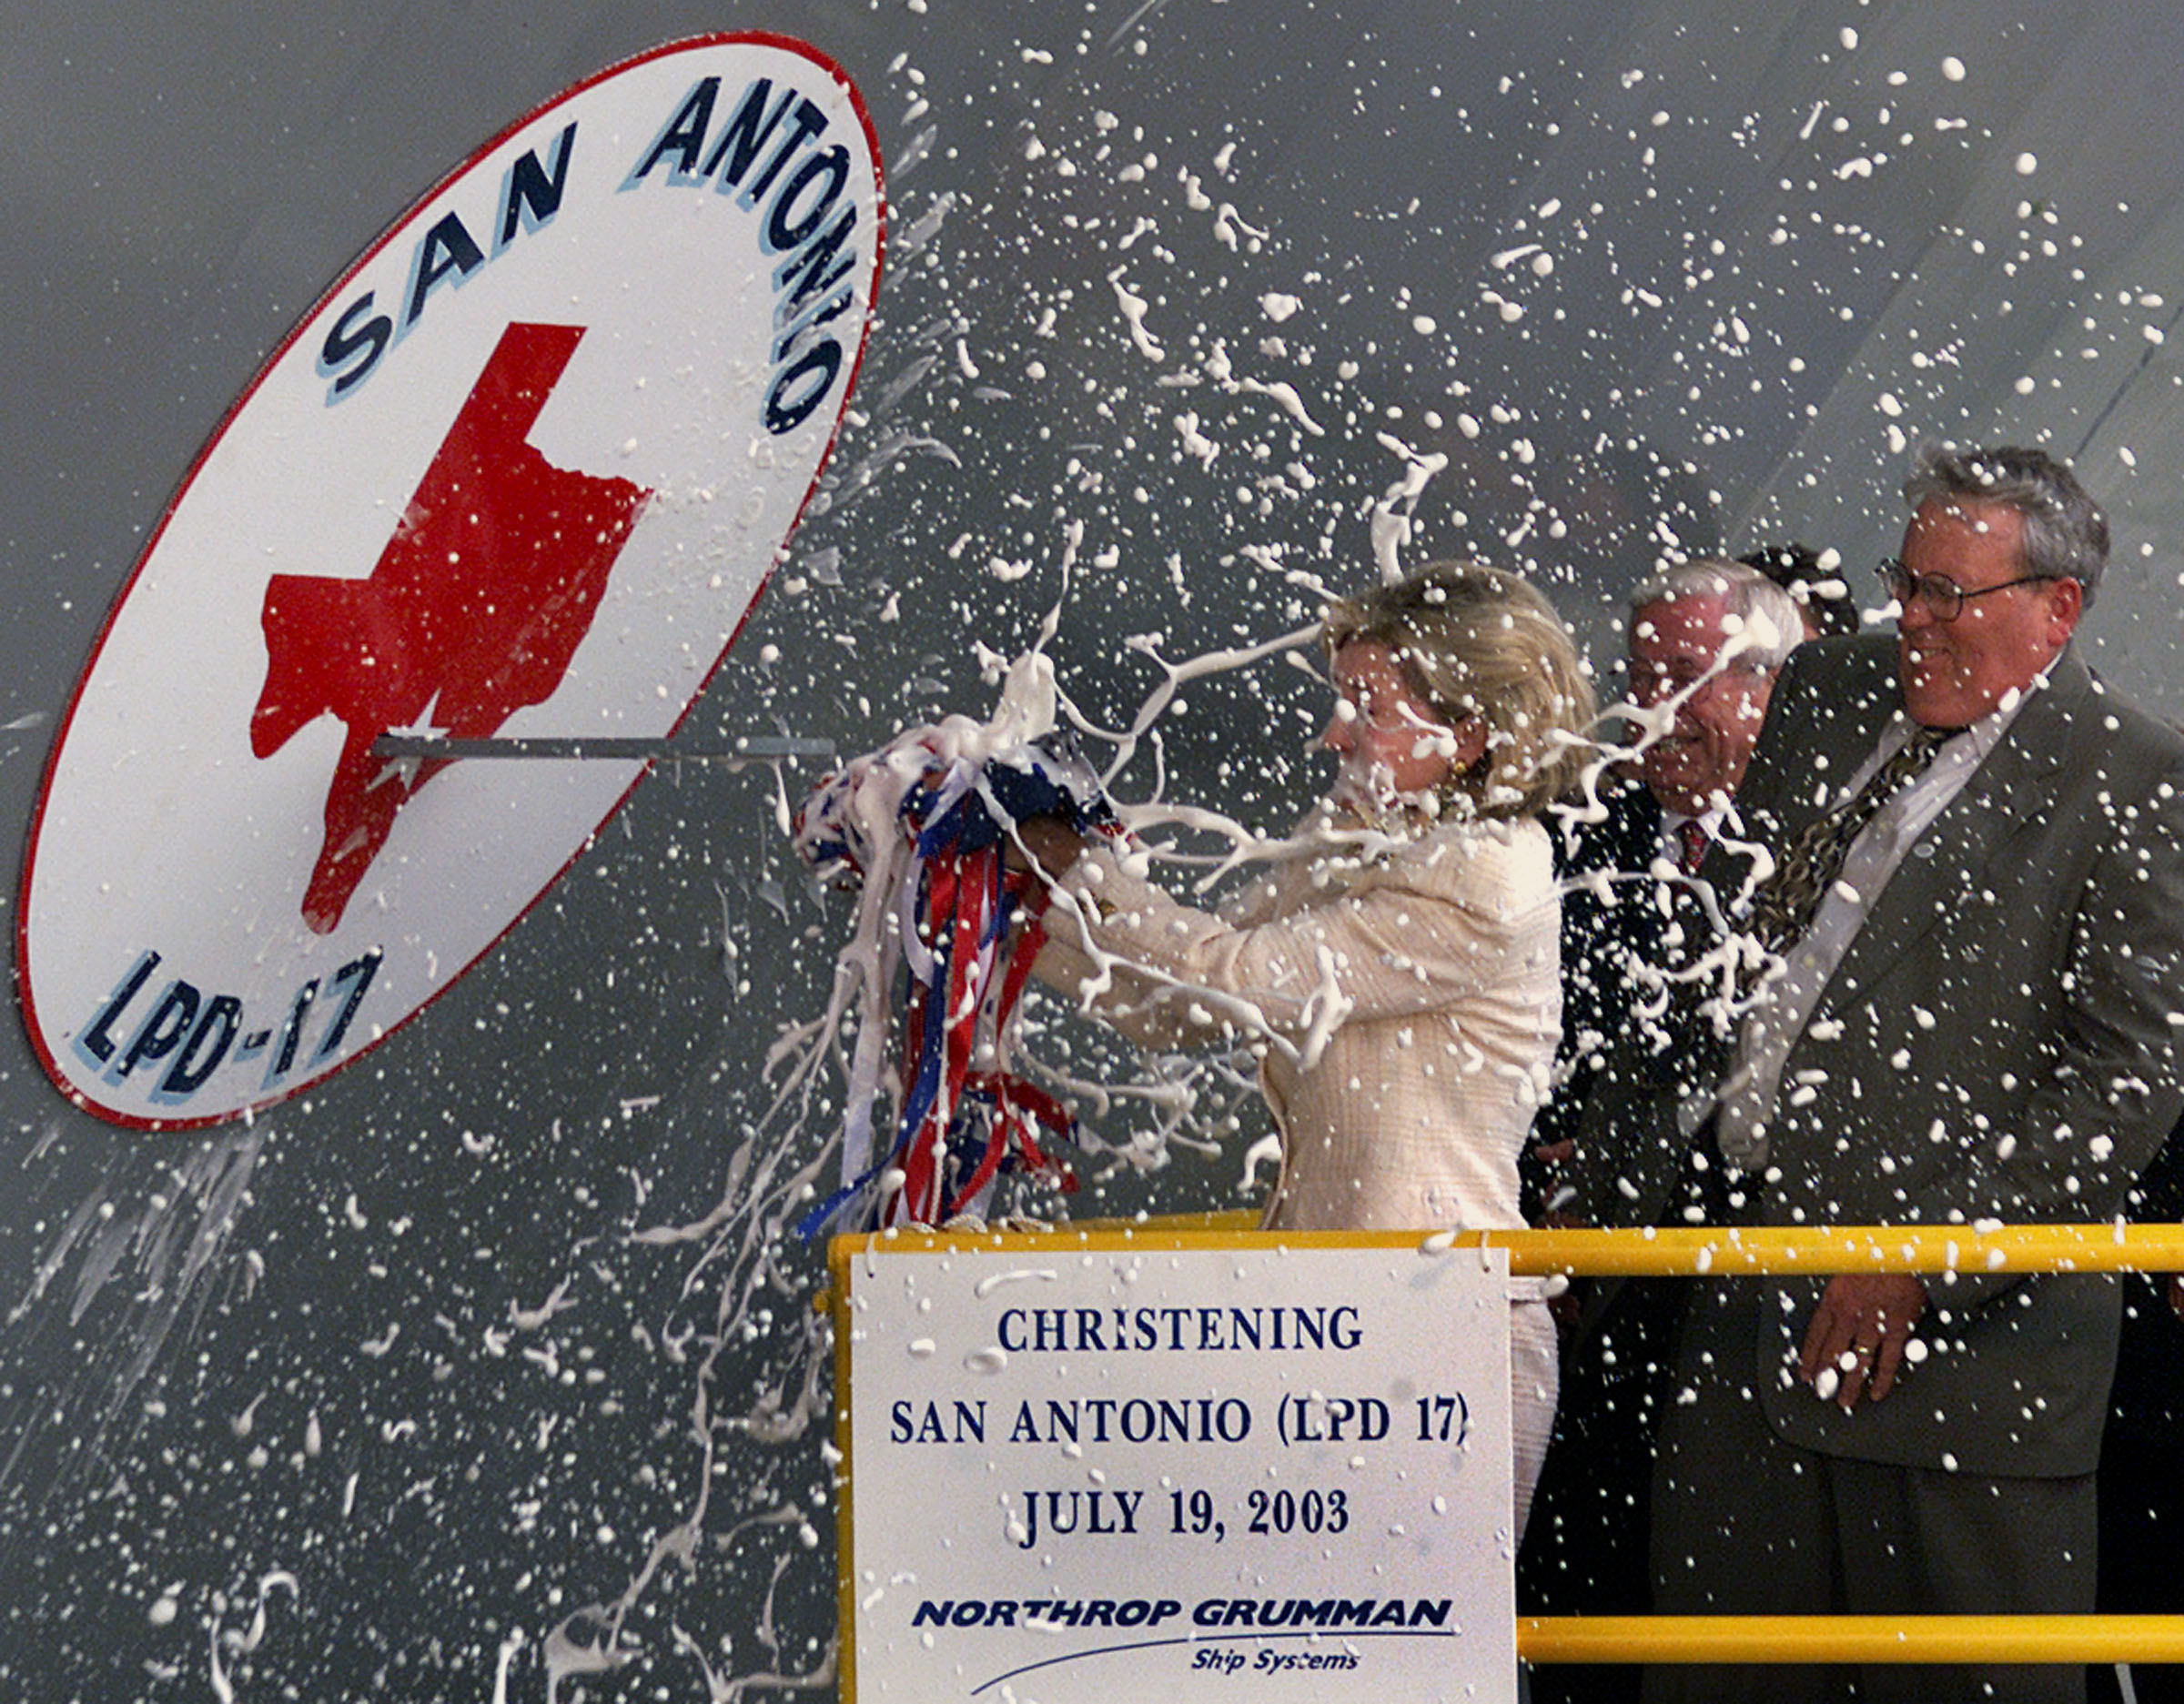 Texas Senator Kay Bailey Hutchison, sponsor of LPD-17 the San Antonio, christens the Navy's the in New Orleans in 2003. US Navy Photo